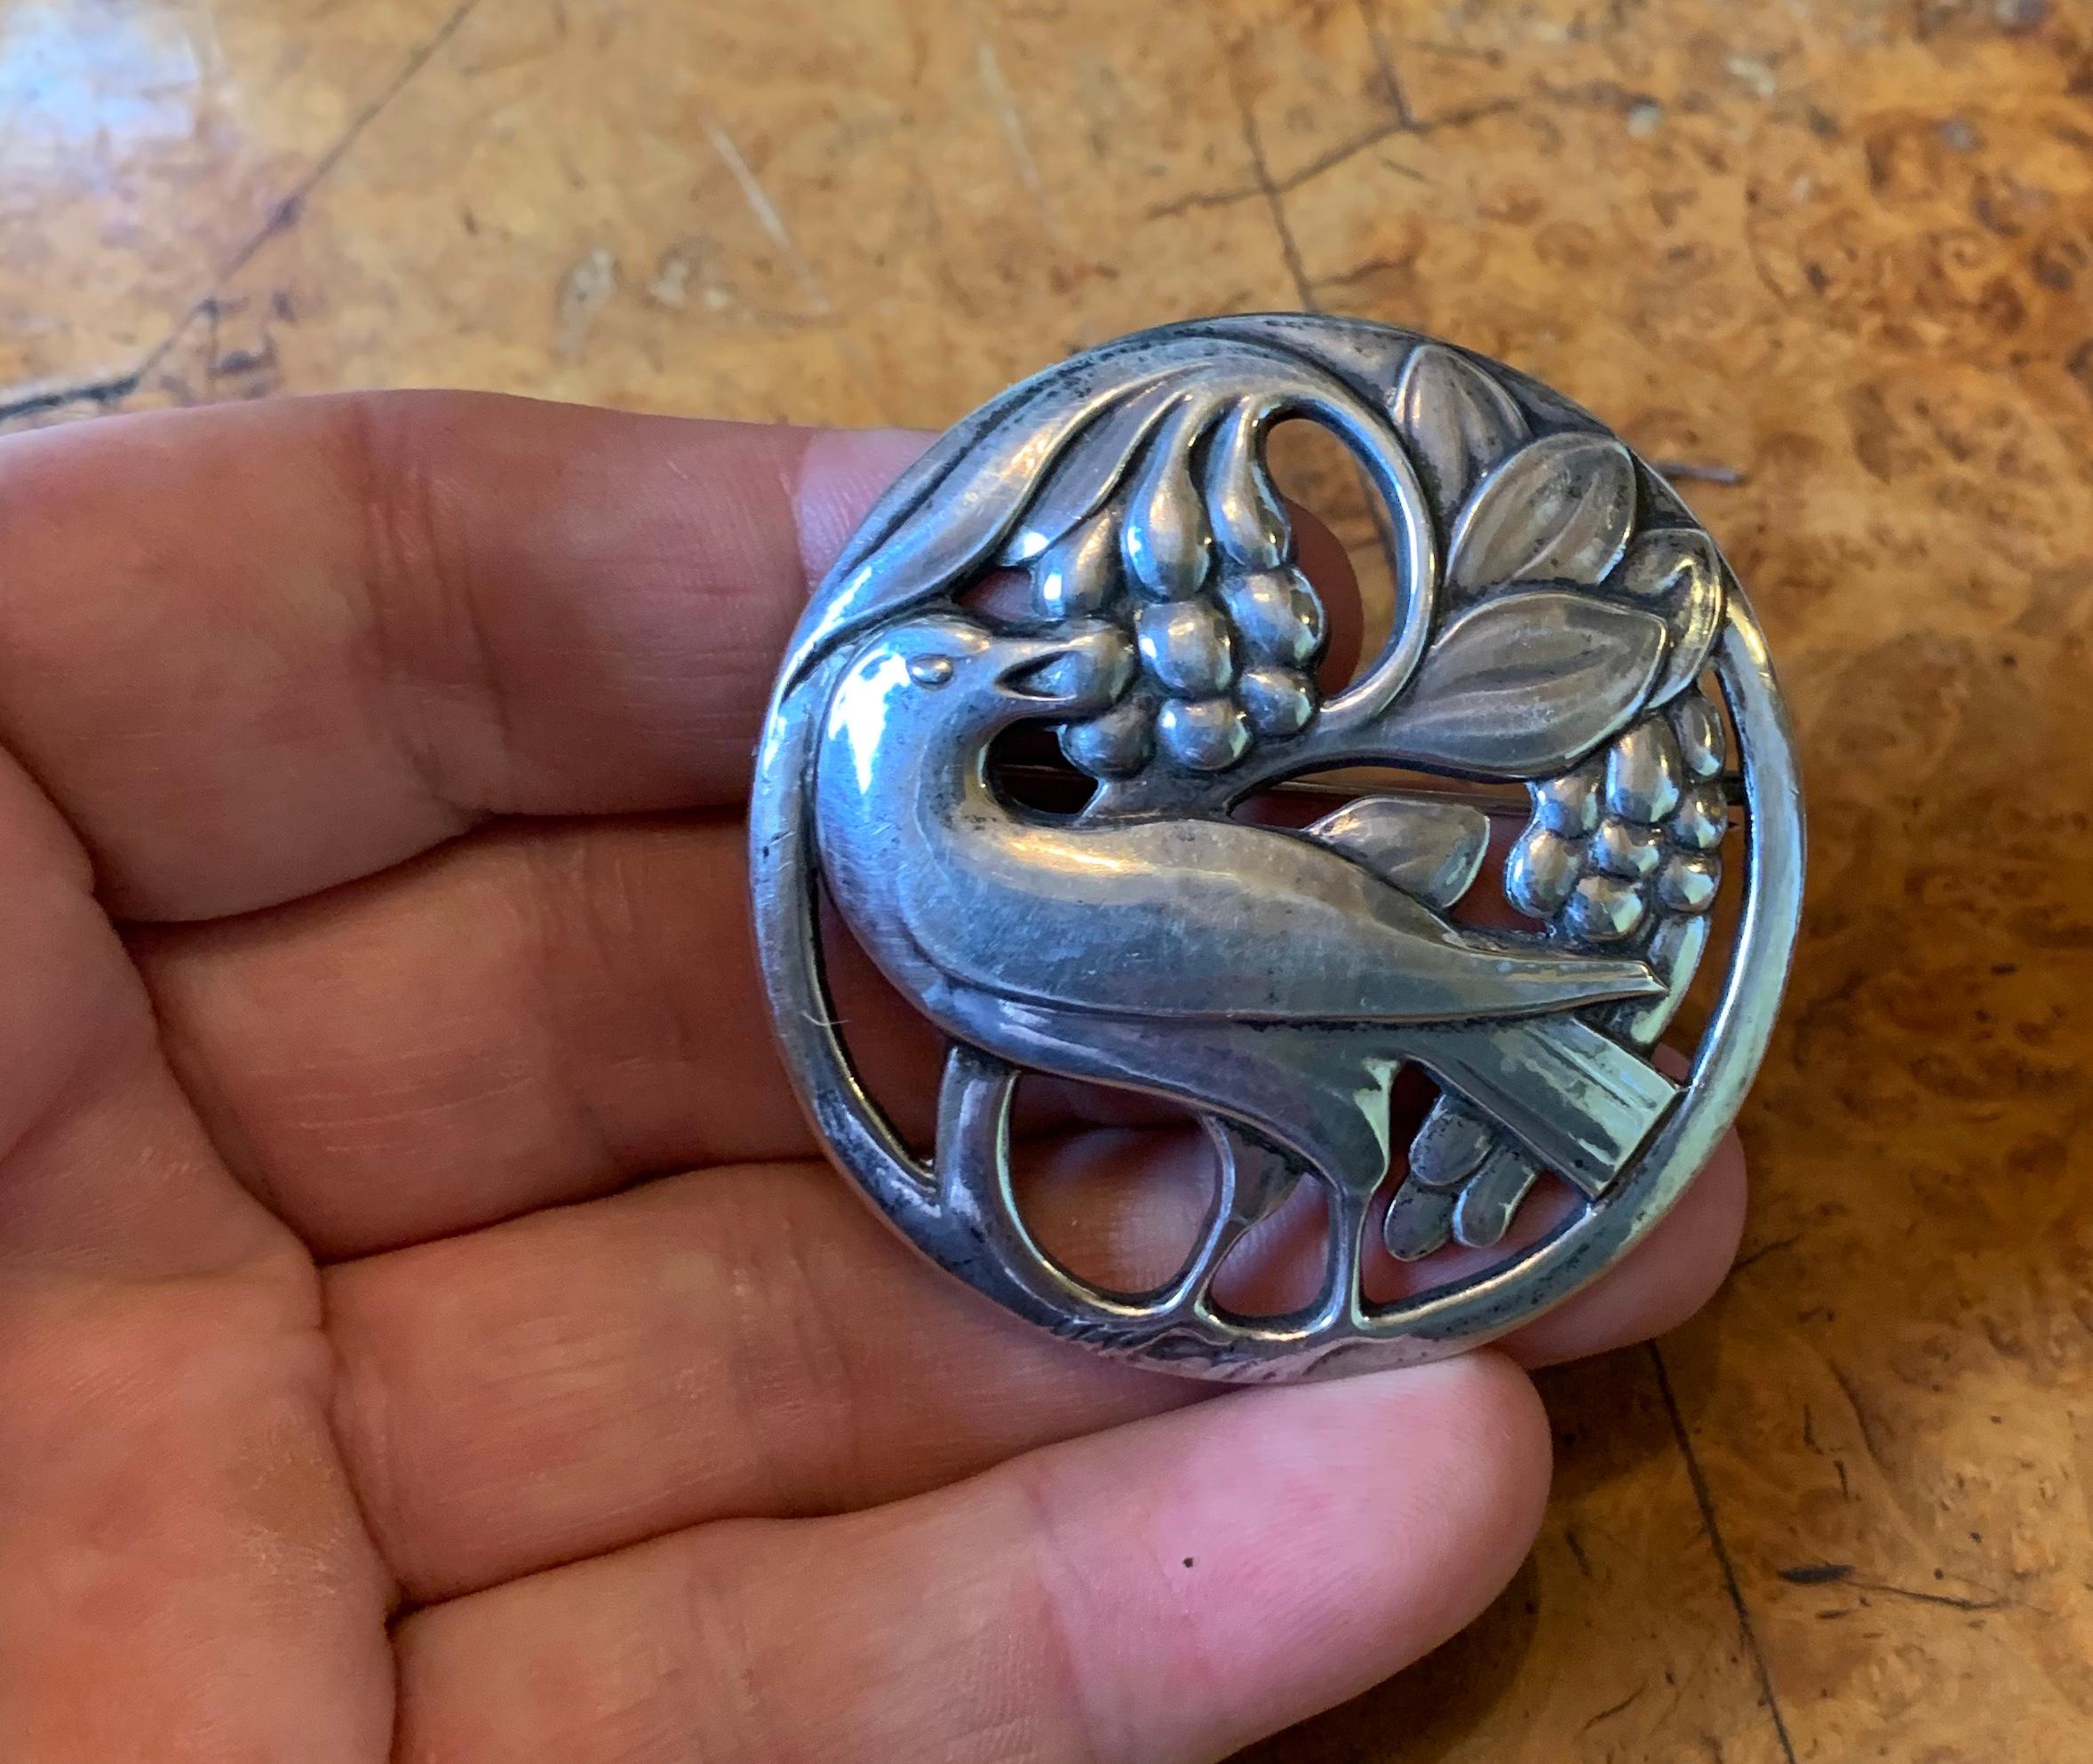 This is the large gorgeous early (1933-1944) Georg Jensen sterling silver pin brooch in the form of a bird eating berries with leaves in a gorgeous open work design.  The brooch has the early Jensen mark of JG in a rectangle and is number 53.
This